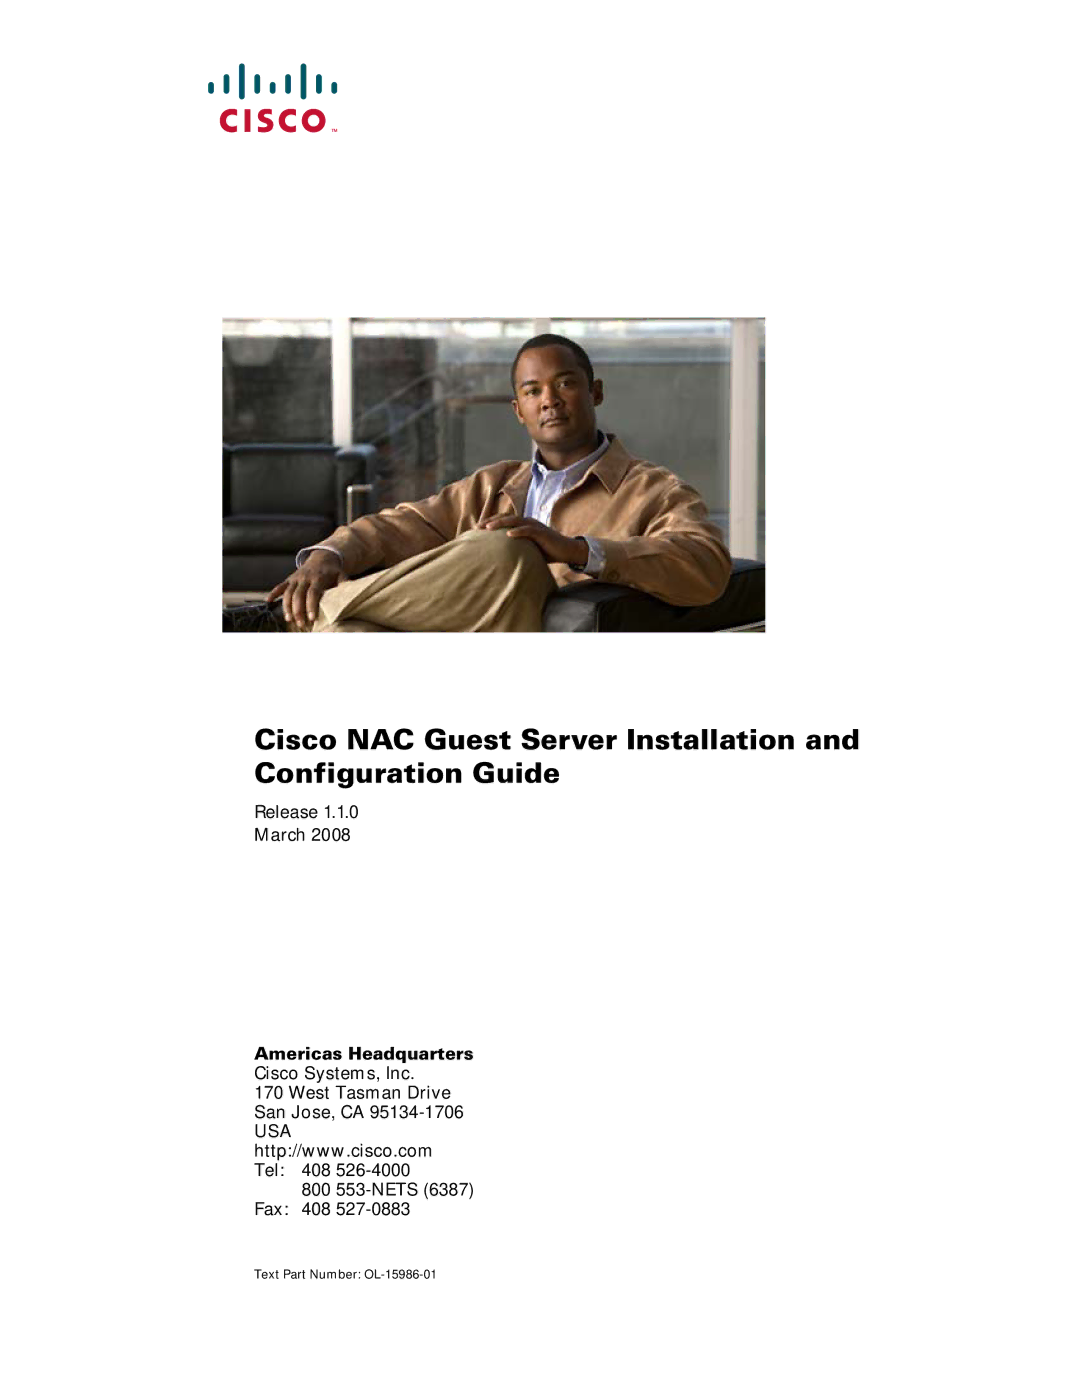 Cisco Systems OL-15986-01 manual Cisco NAC Guest Server Installation and Configuration Guide 